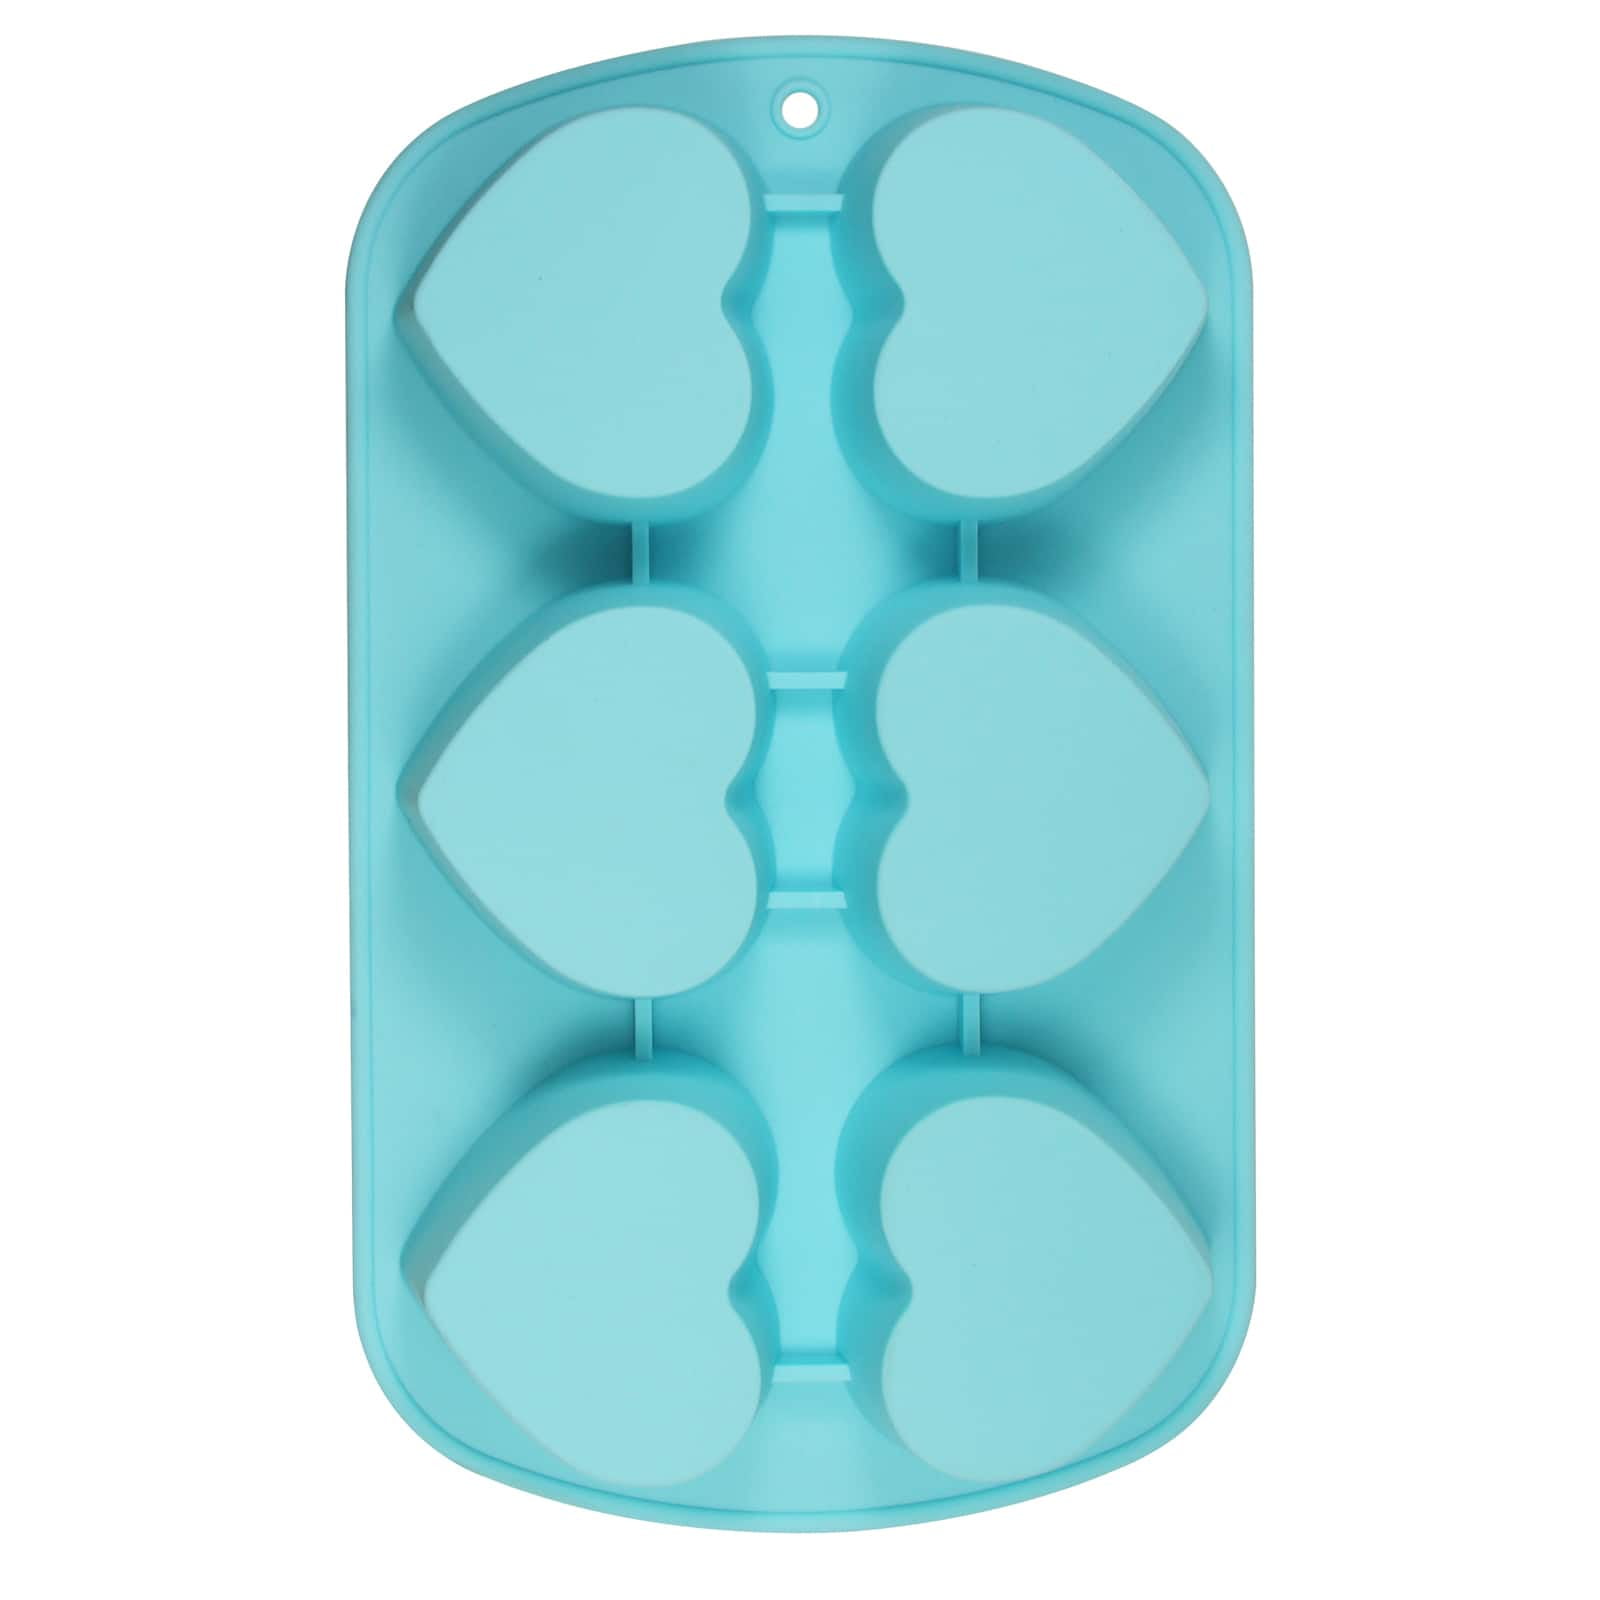 Kitchen & Table by H-E-B 6 Cavity Silicone Treat Mold - Hearts